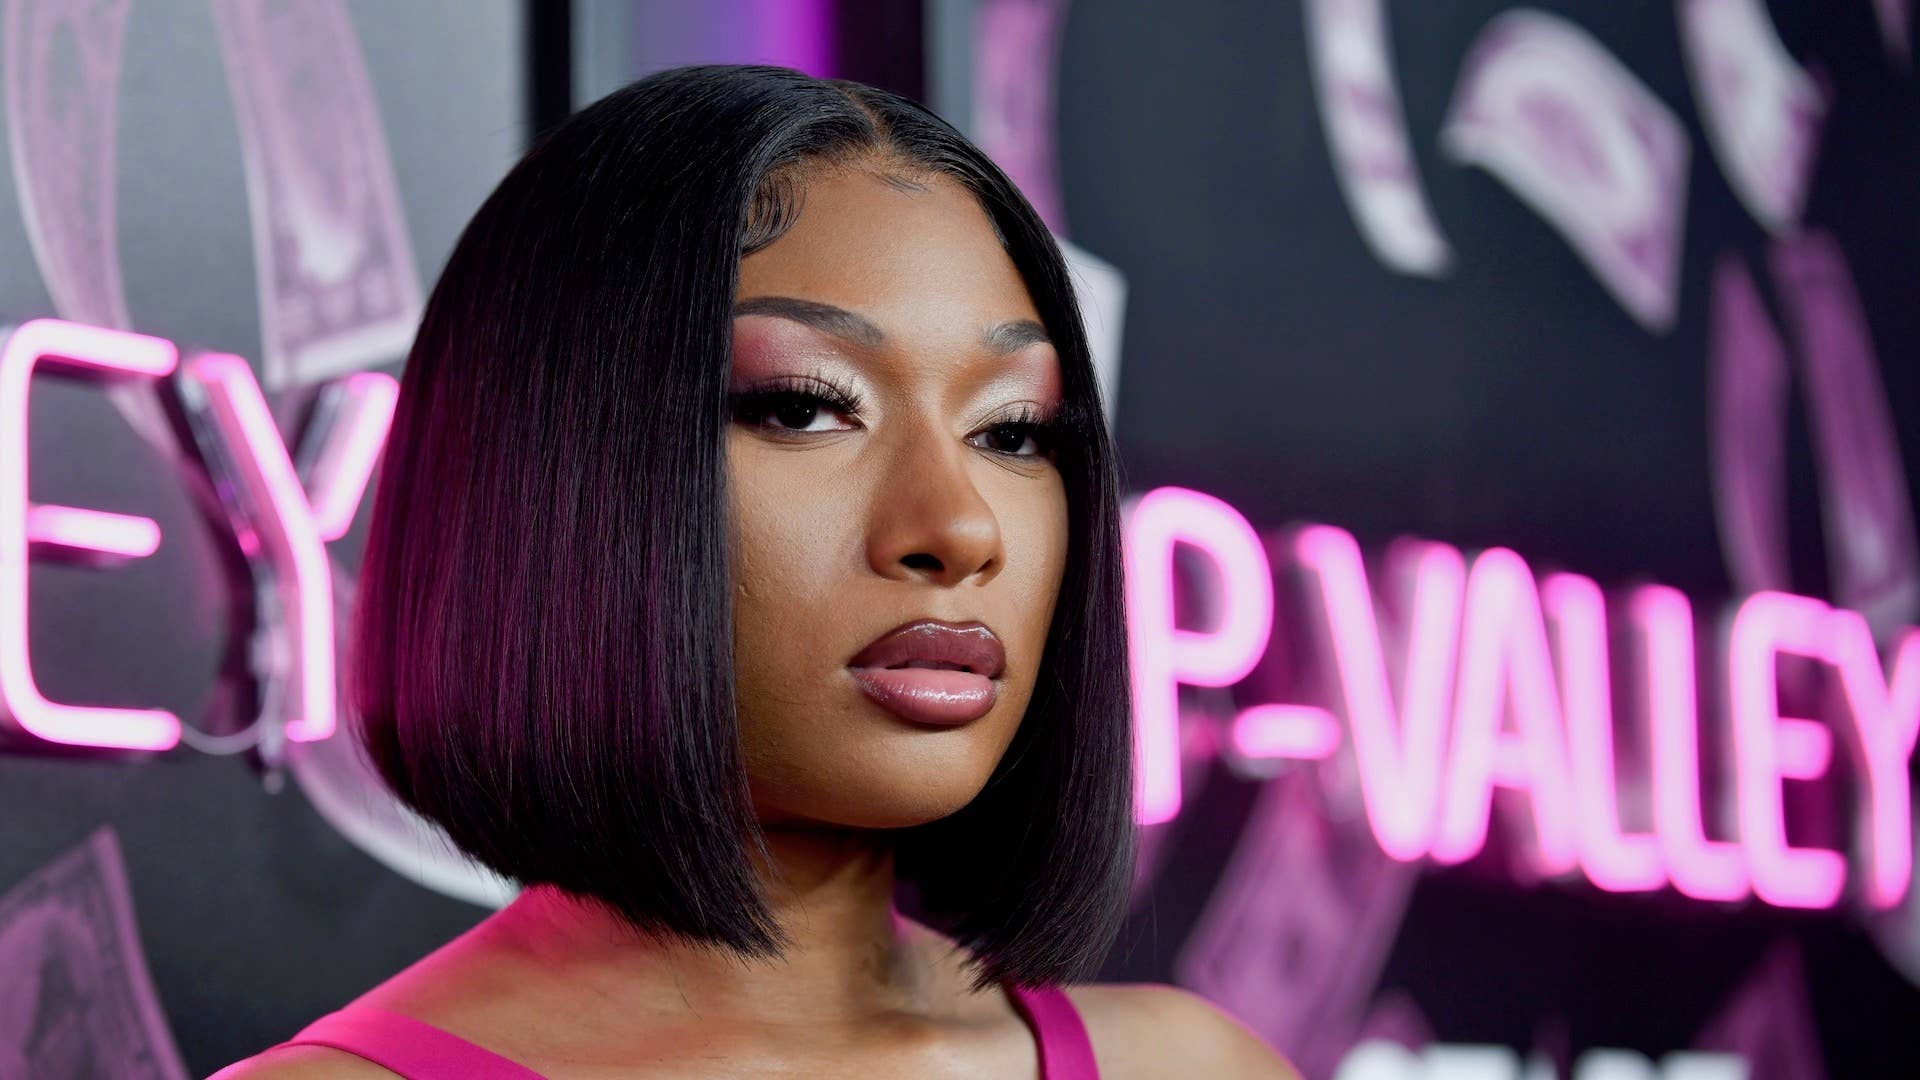 Megan Thee Stallion attends the premiere of STARZ season 2 of "P Valley"